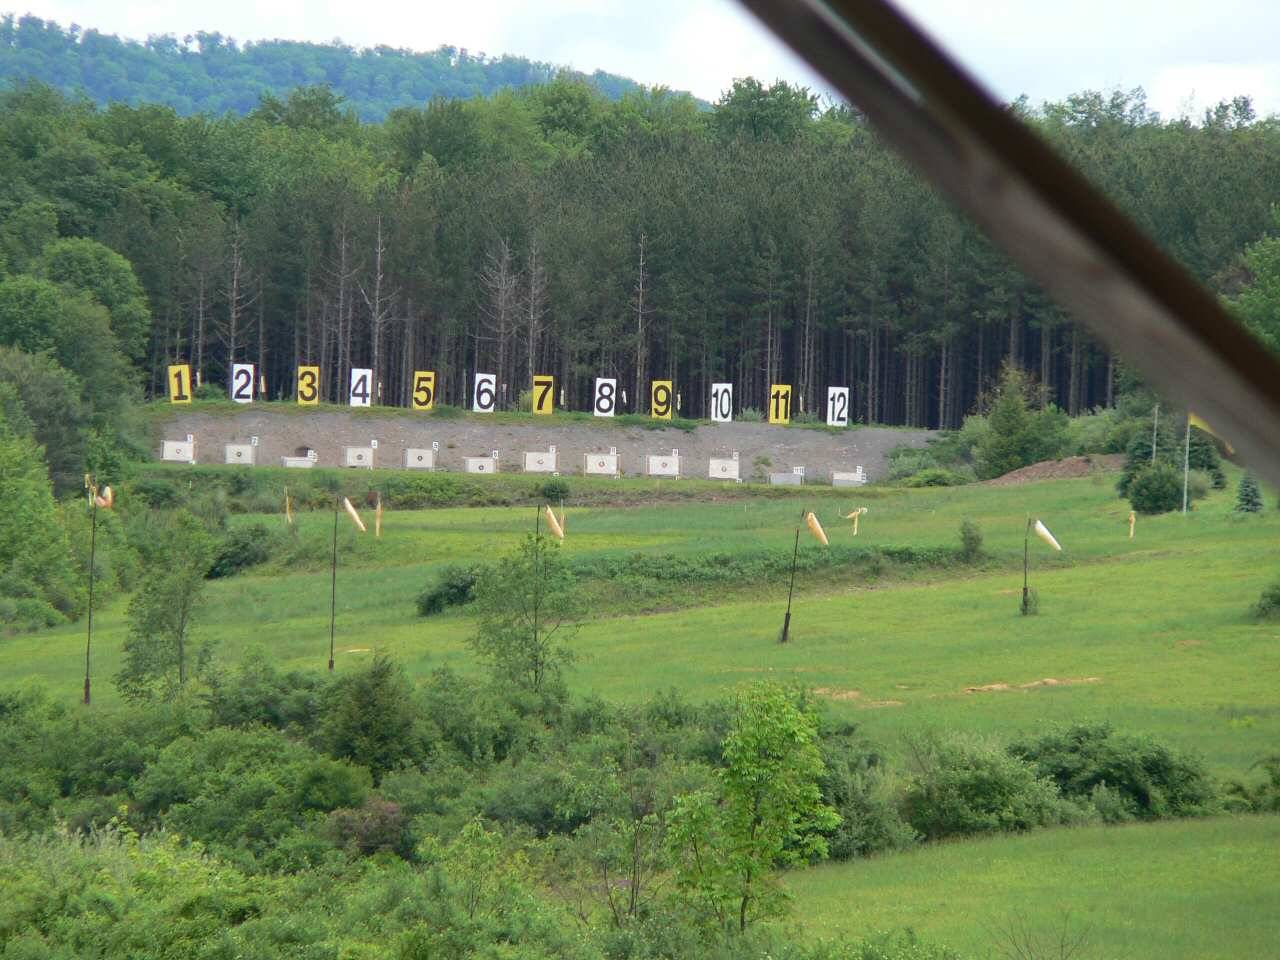 Clear view of the targets